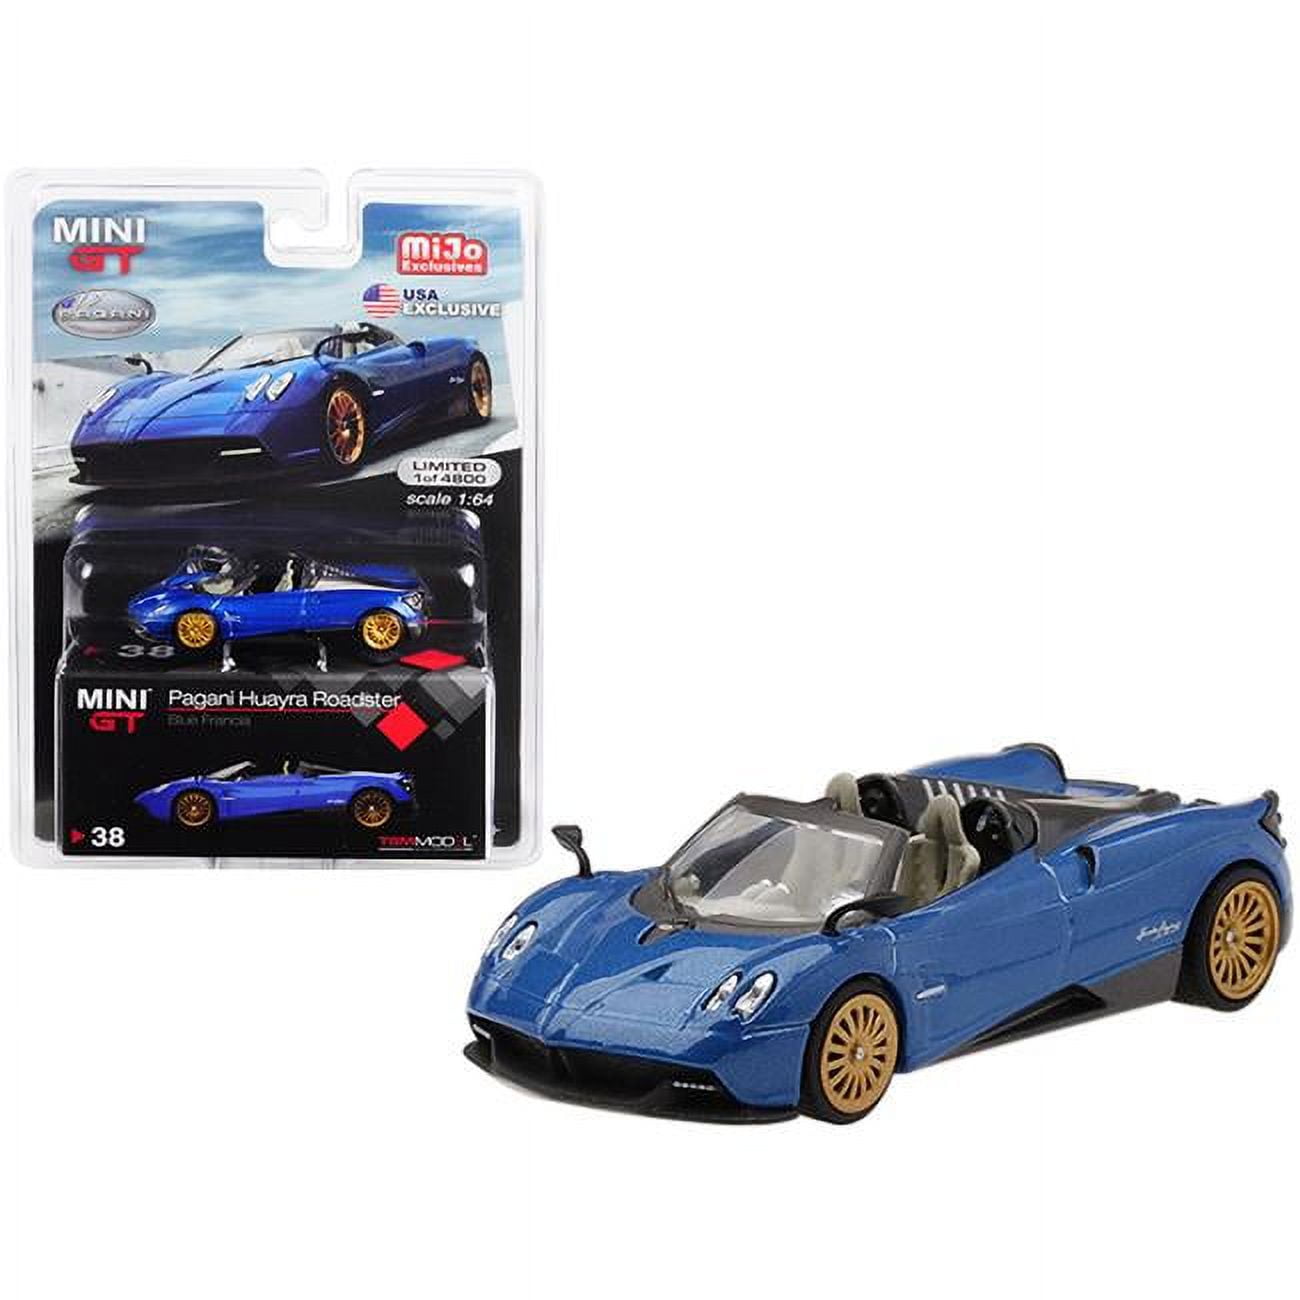 Mgt00038 Pagani Huayra Roadster Blue Francia U.s.a. Exclusive Limited Edition To 4 Worldwide 1-64 Diecast Car